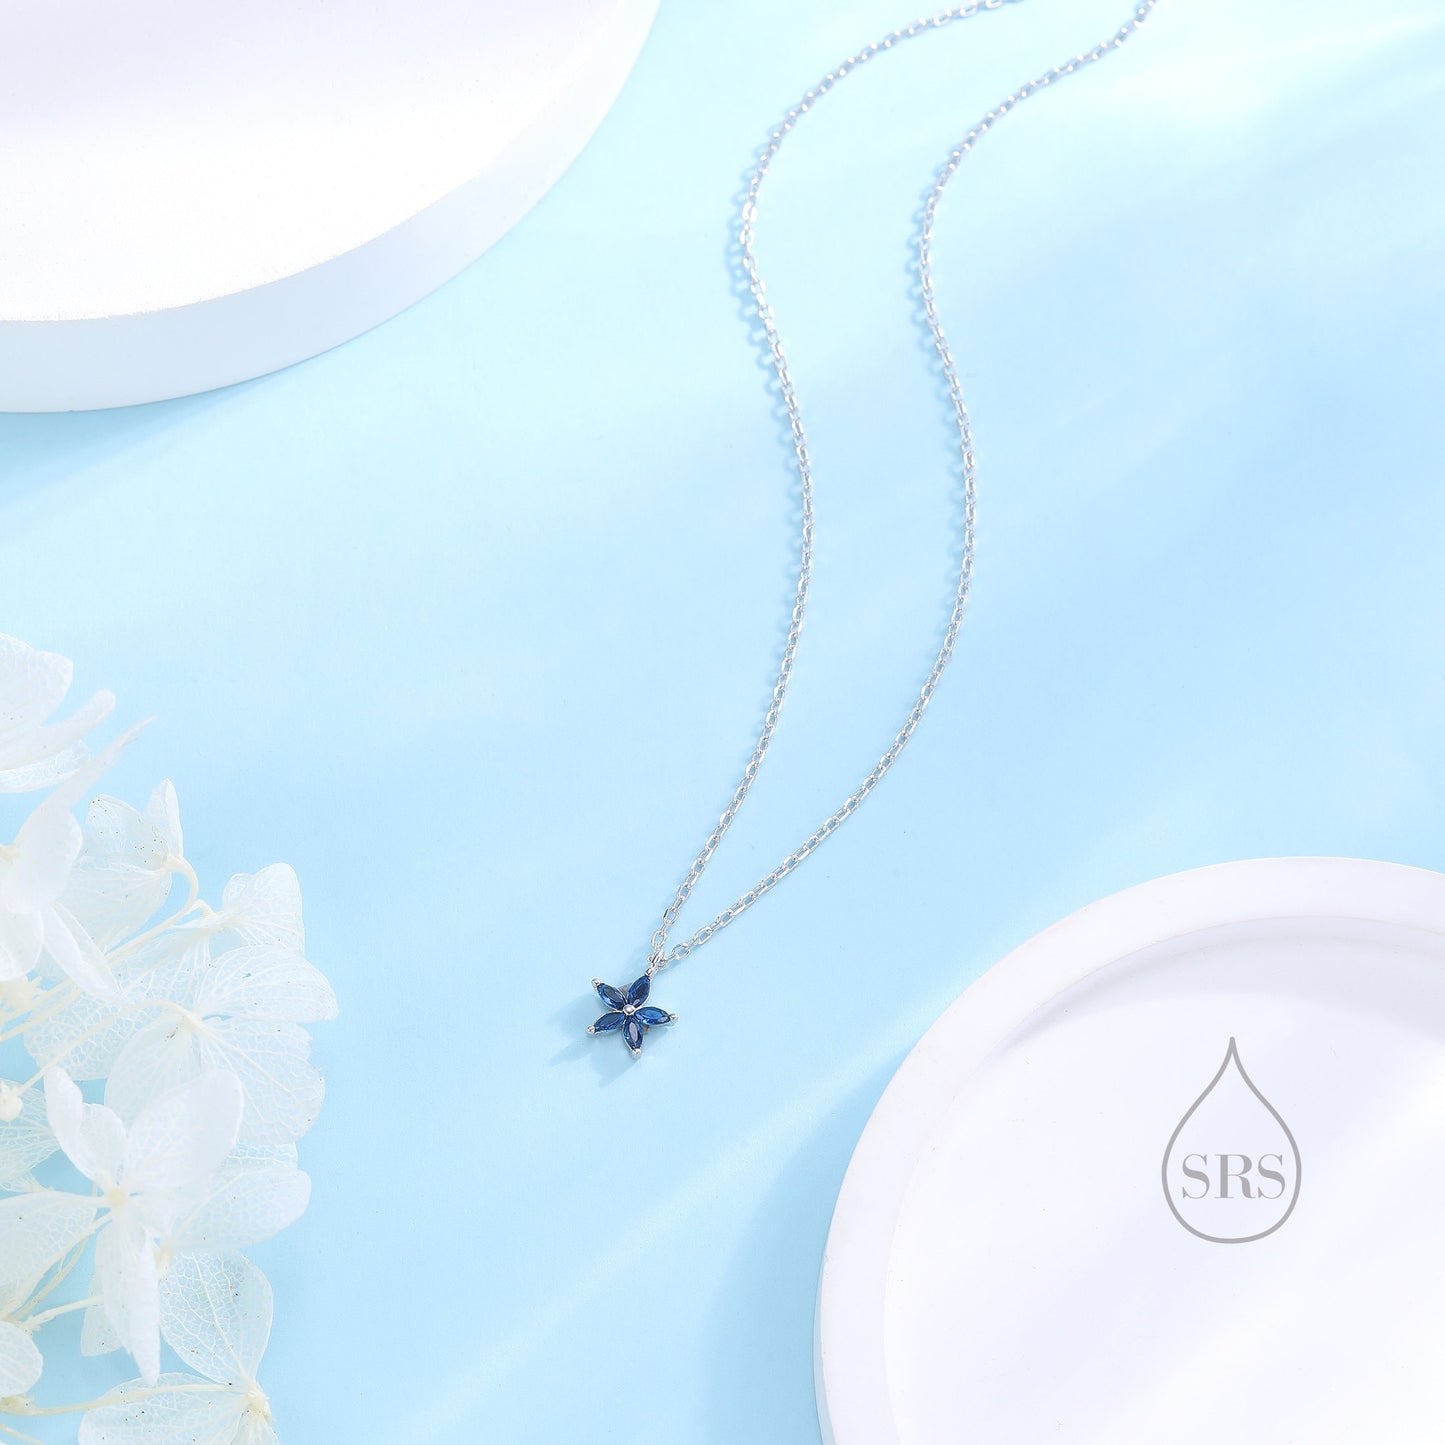 Tiny Sapphire Blue CZ Flower Necklace in Sterling Silver, Silver or Gold, CZ Flower Necklace, CZ Cluster Floral Necklace